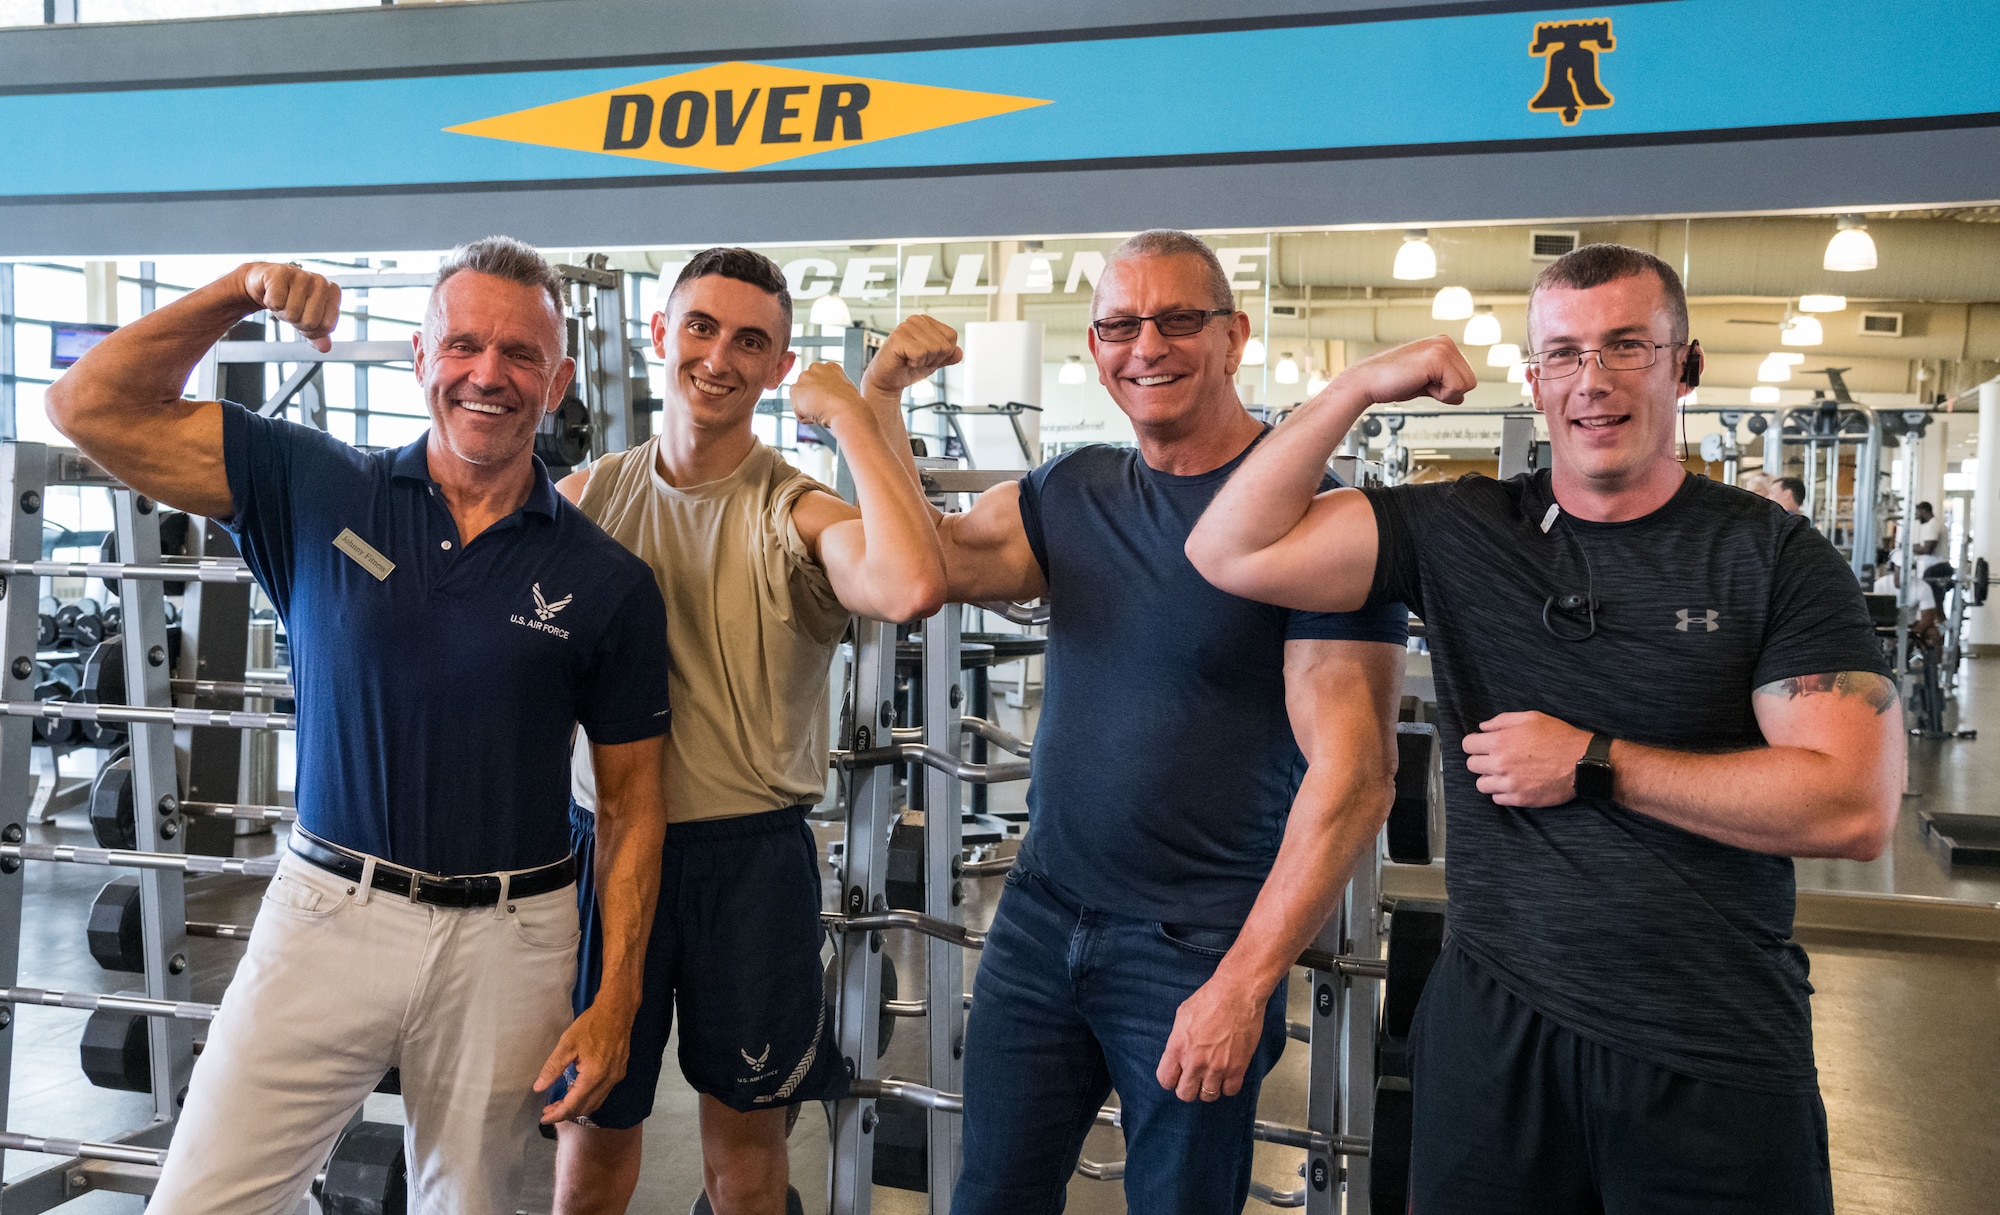 From left to right, John Walters, 436th Force Support Squadron fitness program manager; Airman 1st Class Rodney Kerley, 436th Communications Squadron cybersystems operator; chef Robert Irvine and Tech. Sgt. Heath Hackwell, 436th Maintenance Group maintenance qualification training program noncommissioned officer in charge of instructors, flex their biceps, Aug. 27, 2019, at the Fitness Center on Dover Air Force Base, Del. Irvine talked with Airmen during his tour of the facility. (U.S. Air Force photo by Roland Balik)